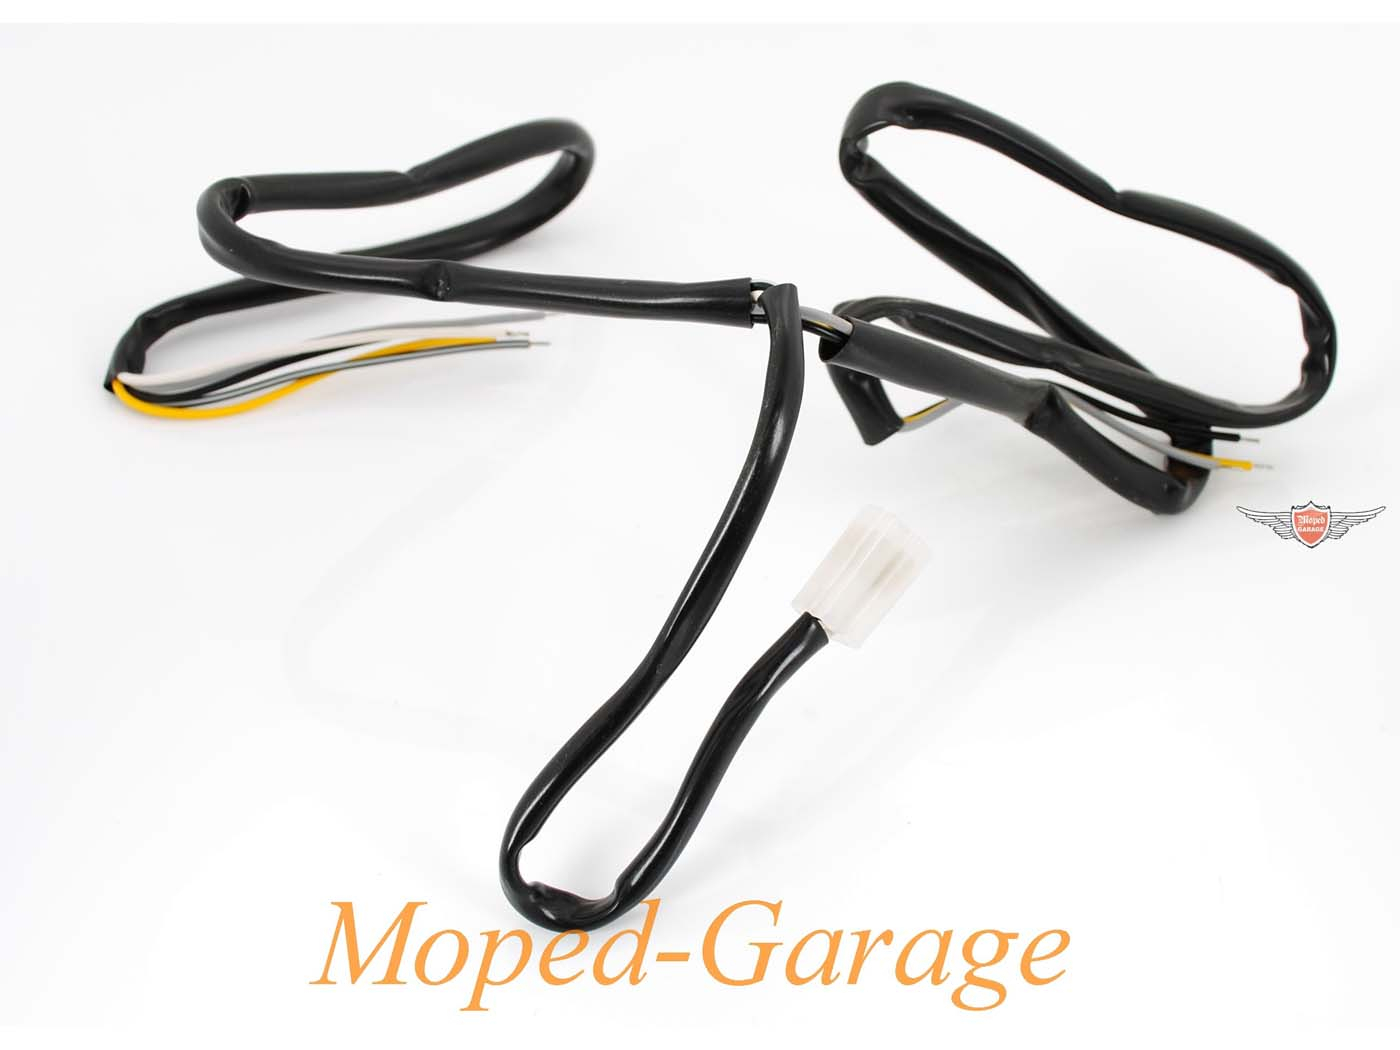 Wiring Harness For Puch Maxi Moped Moped Mokick